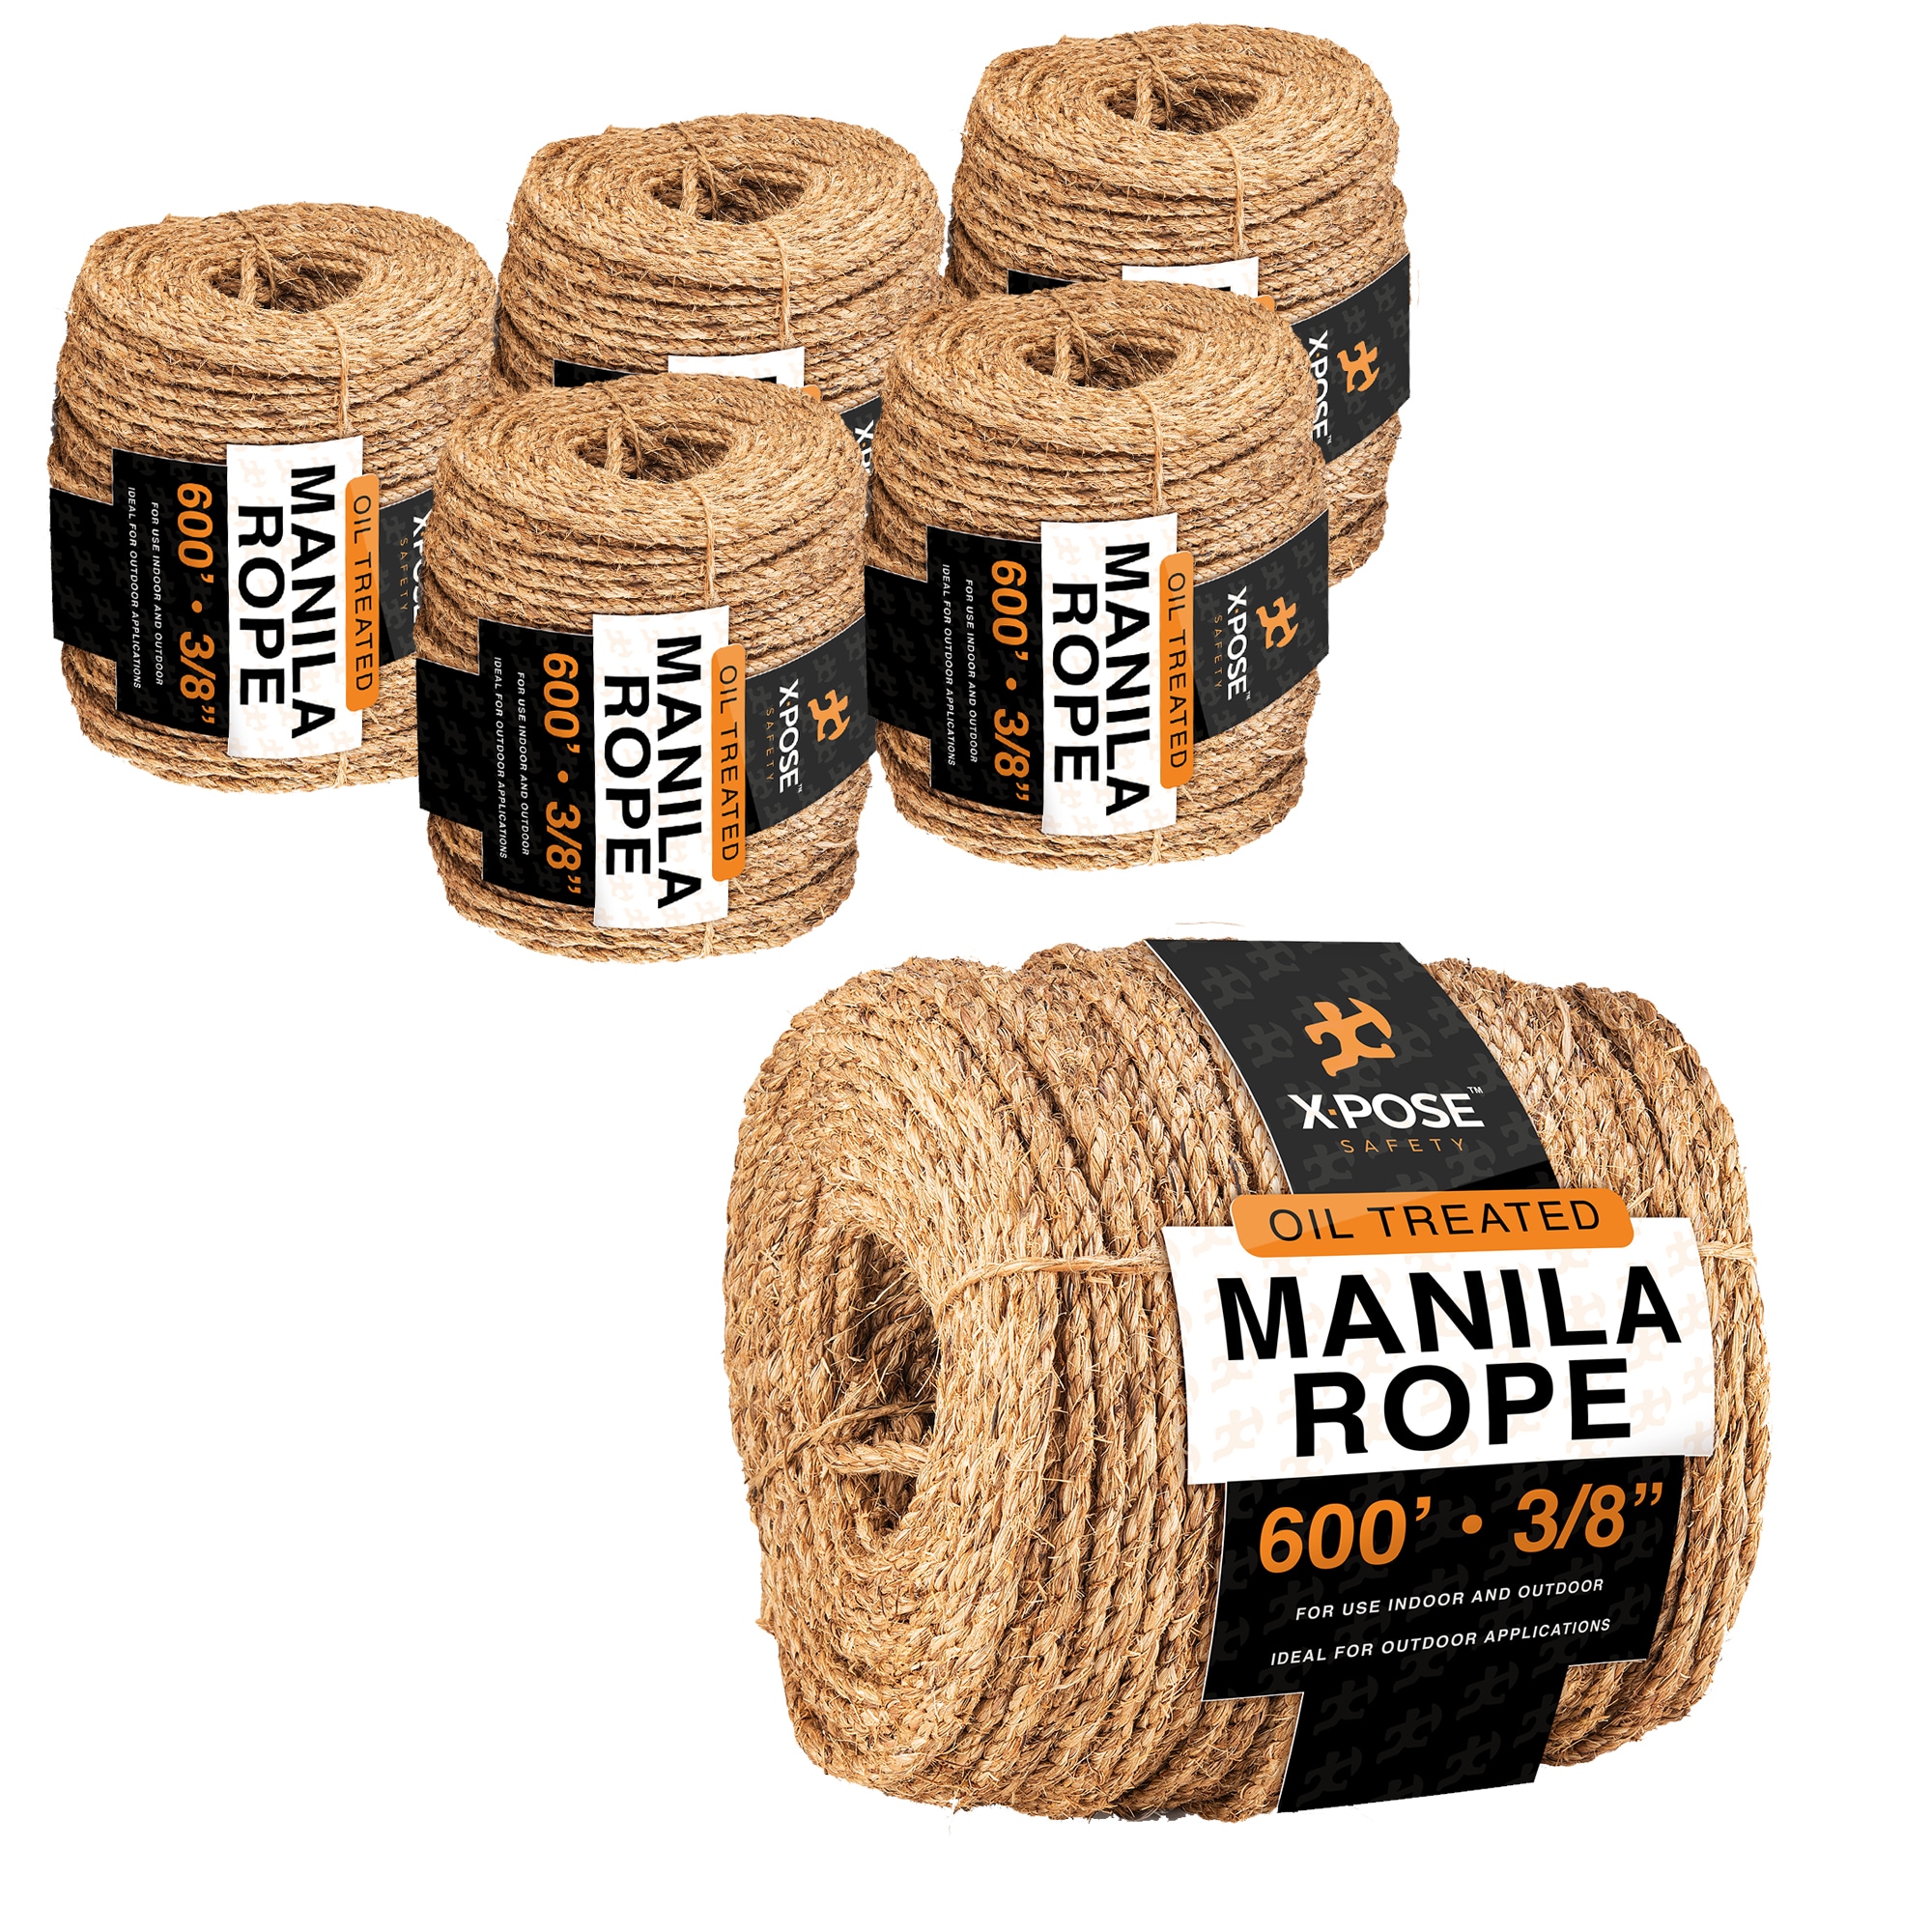 XPOSE SAFETY Manila Rope - 3/8 Inch Rope 600 Ft - 3 Strand Cordage Twisted  Braided Rope - Thick Natural Fiber Rope for, Marine, Decorative Rope for  Crafts, Porch Column, Outdoor Pole